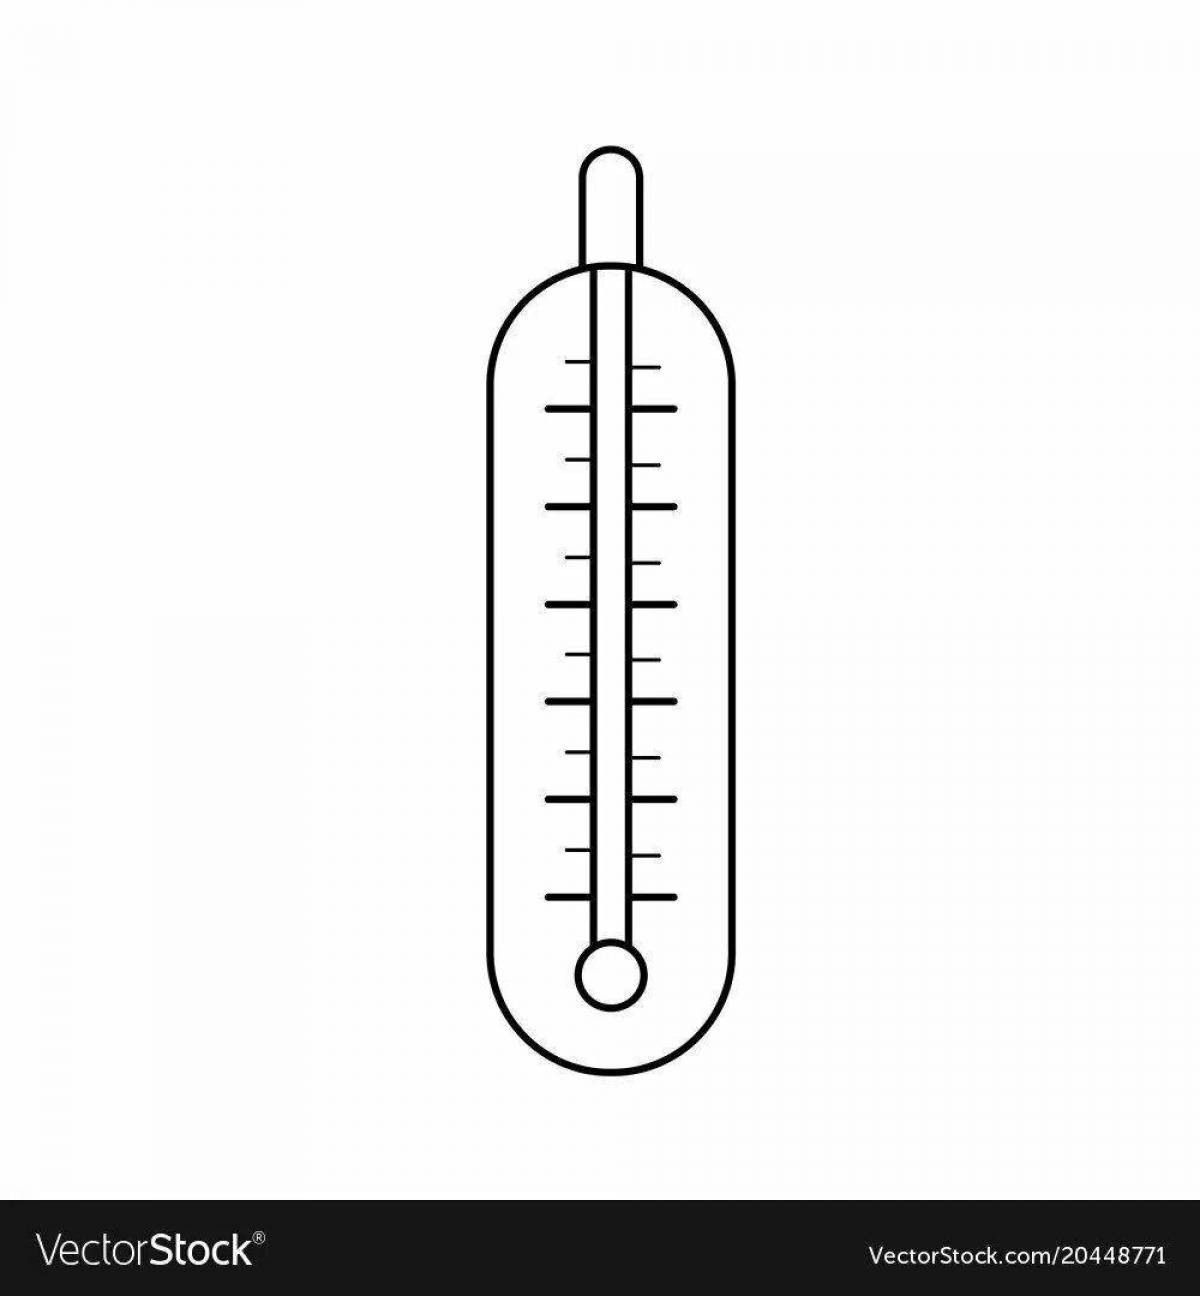 Inspirational thermometer coloring book for kids